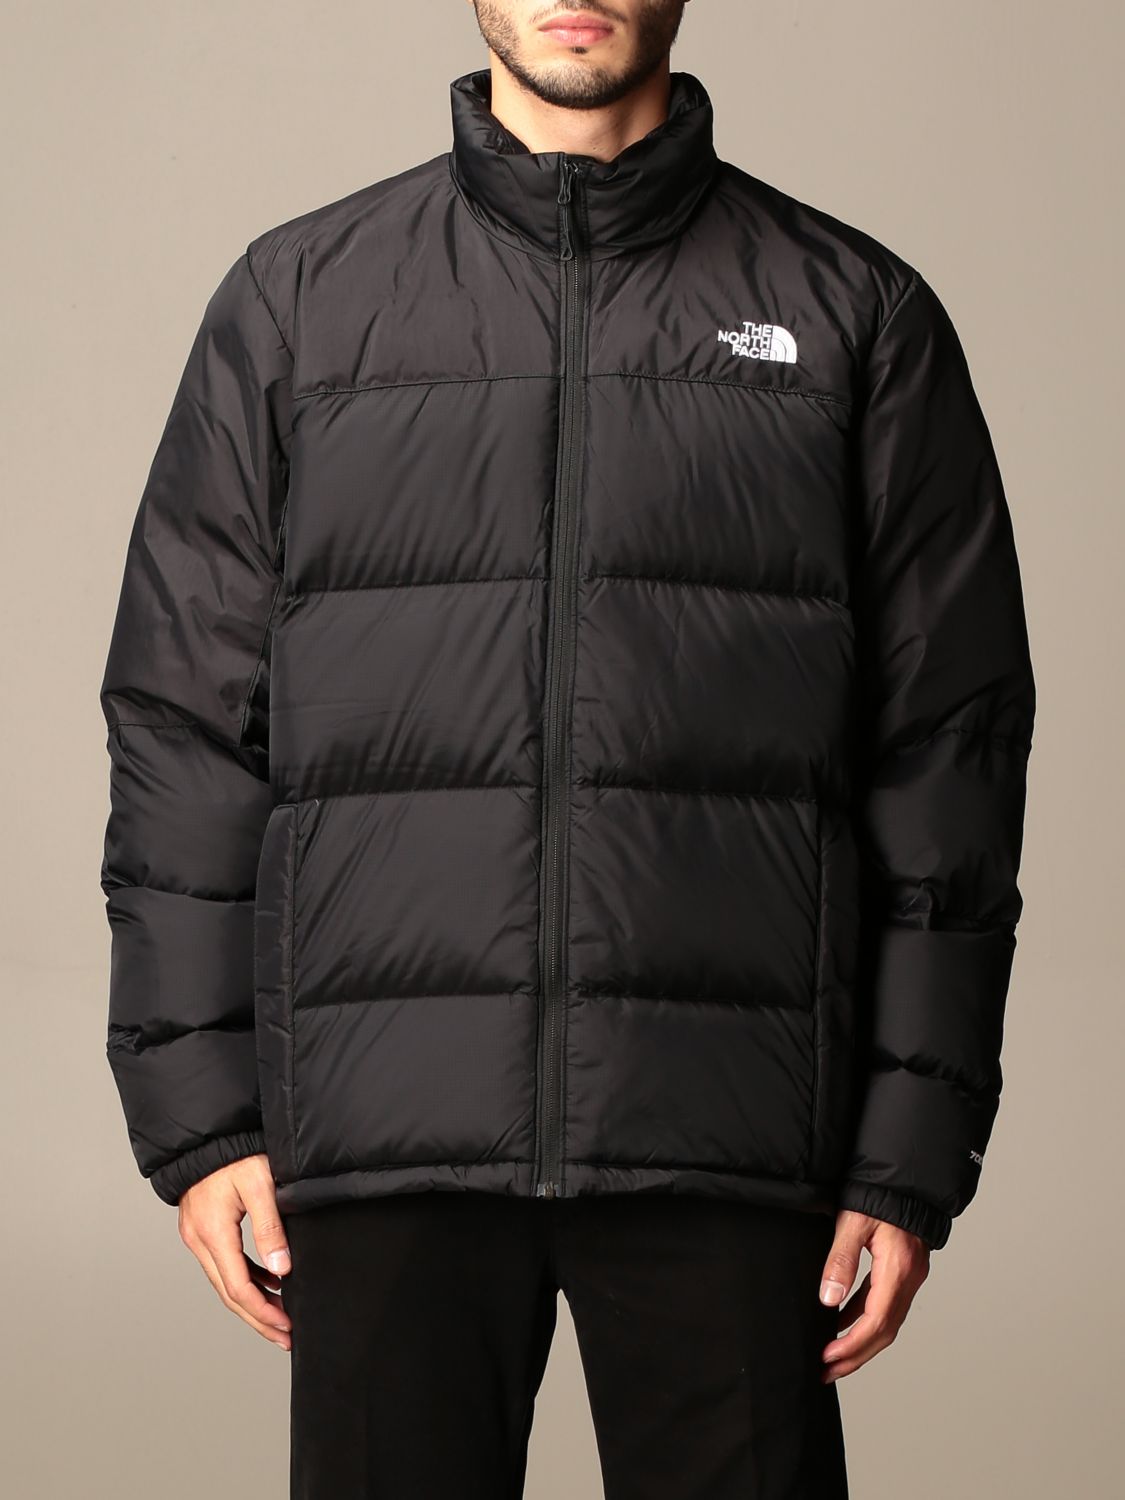 THE NORTH FACE: jacket for men - Black | The North Face jacket NF0A4M9J ...